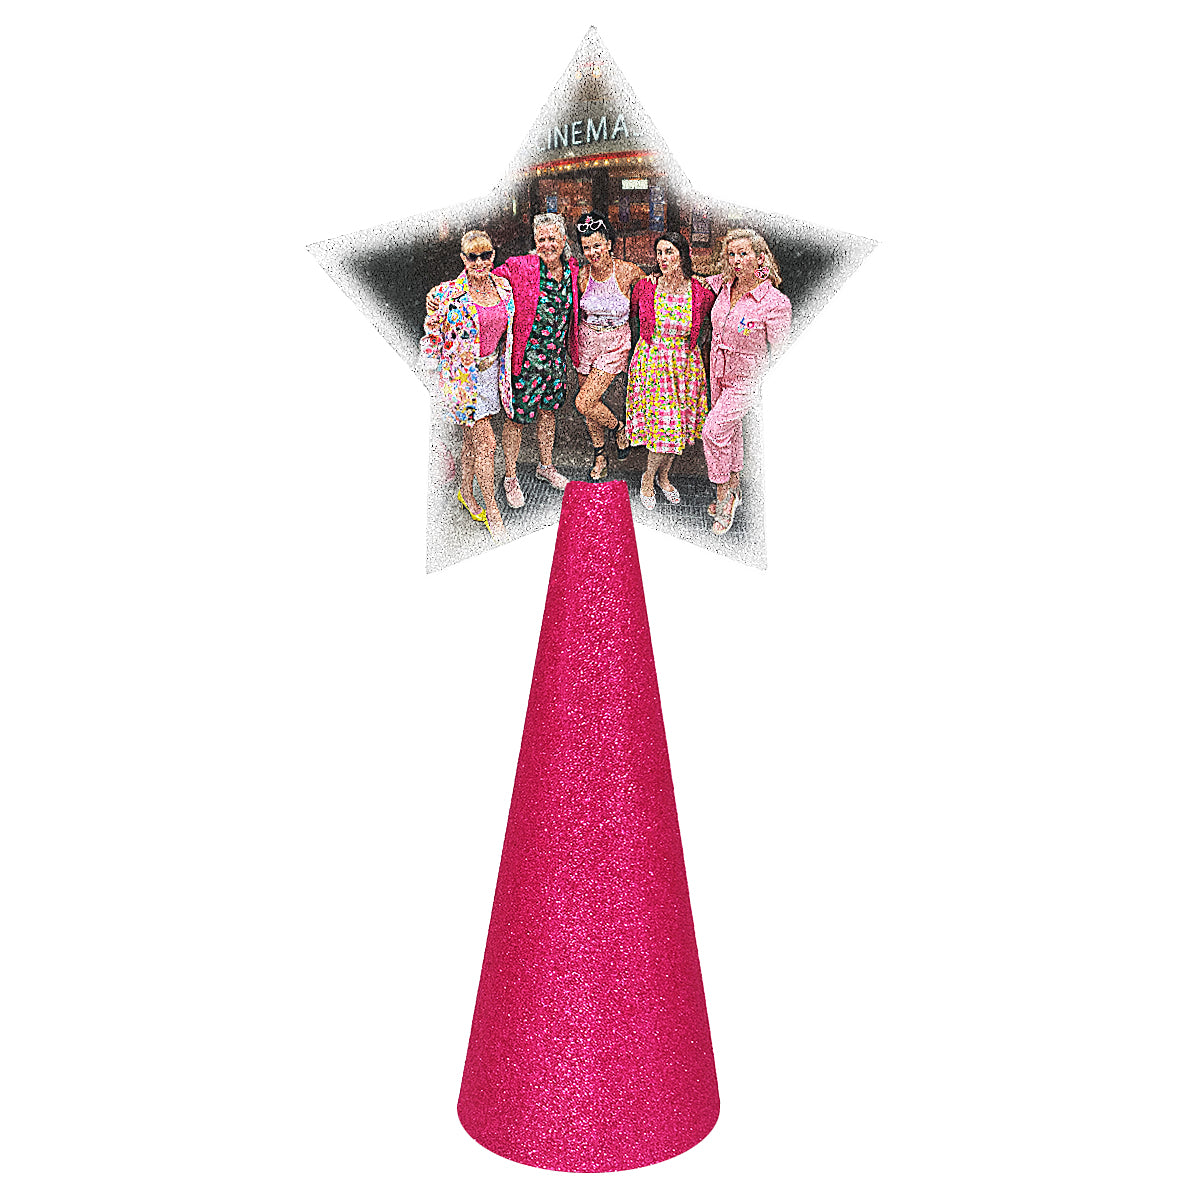 Custom tree topper - with sample friends at Barbie movie photo - hot pink/magenta glitter cone - double-sided front